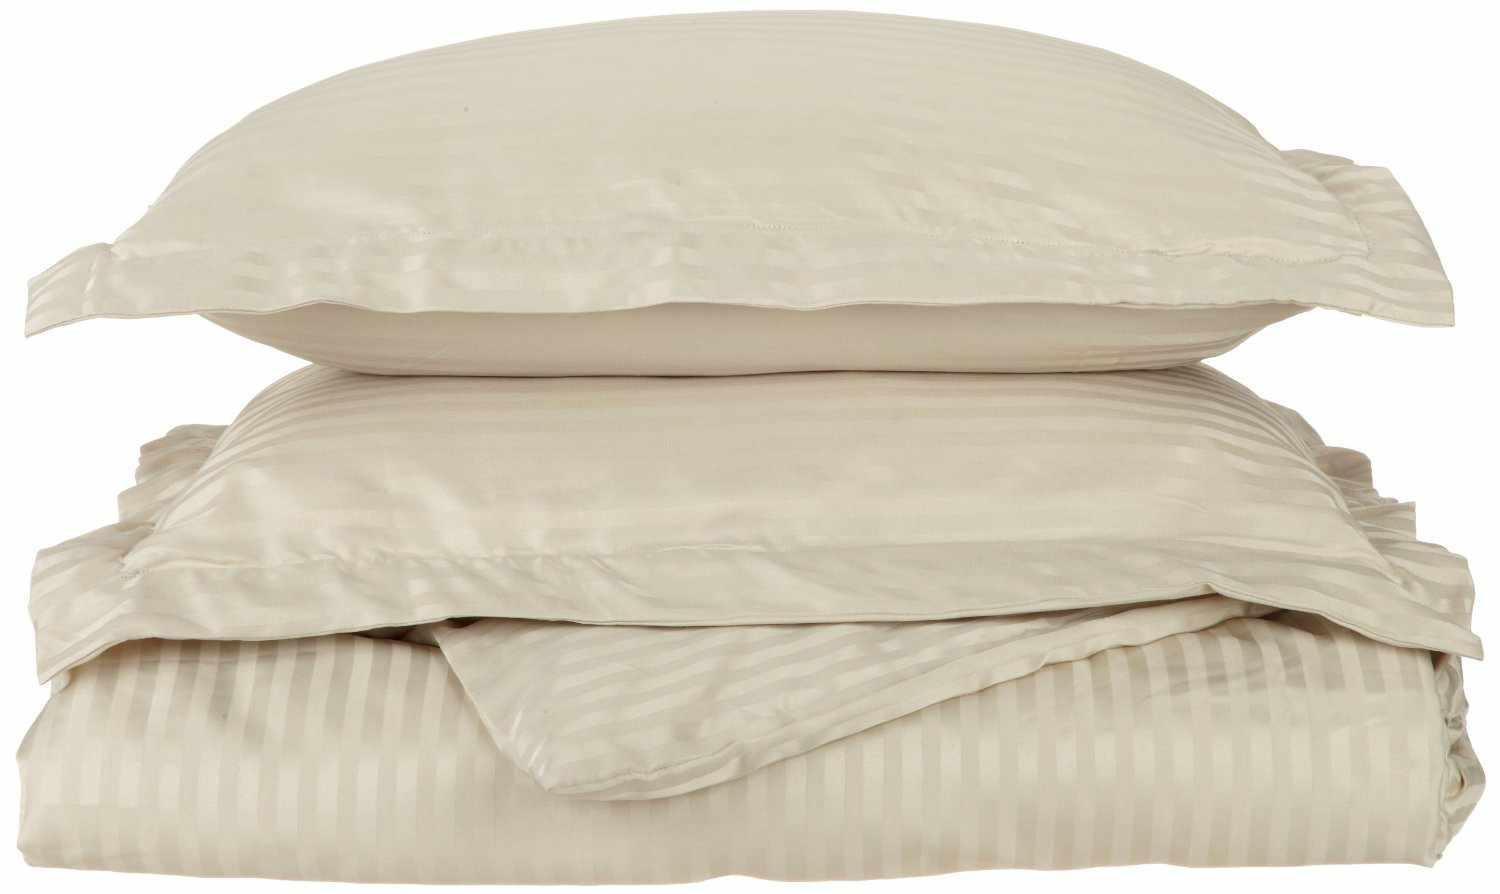 Superior Microfiber Wrinkle-Free Stripe Breathable Duvet Cover Set with Button Closure - Tan